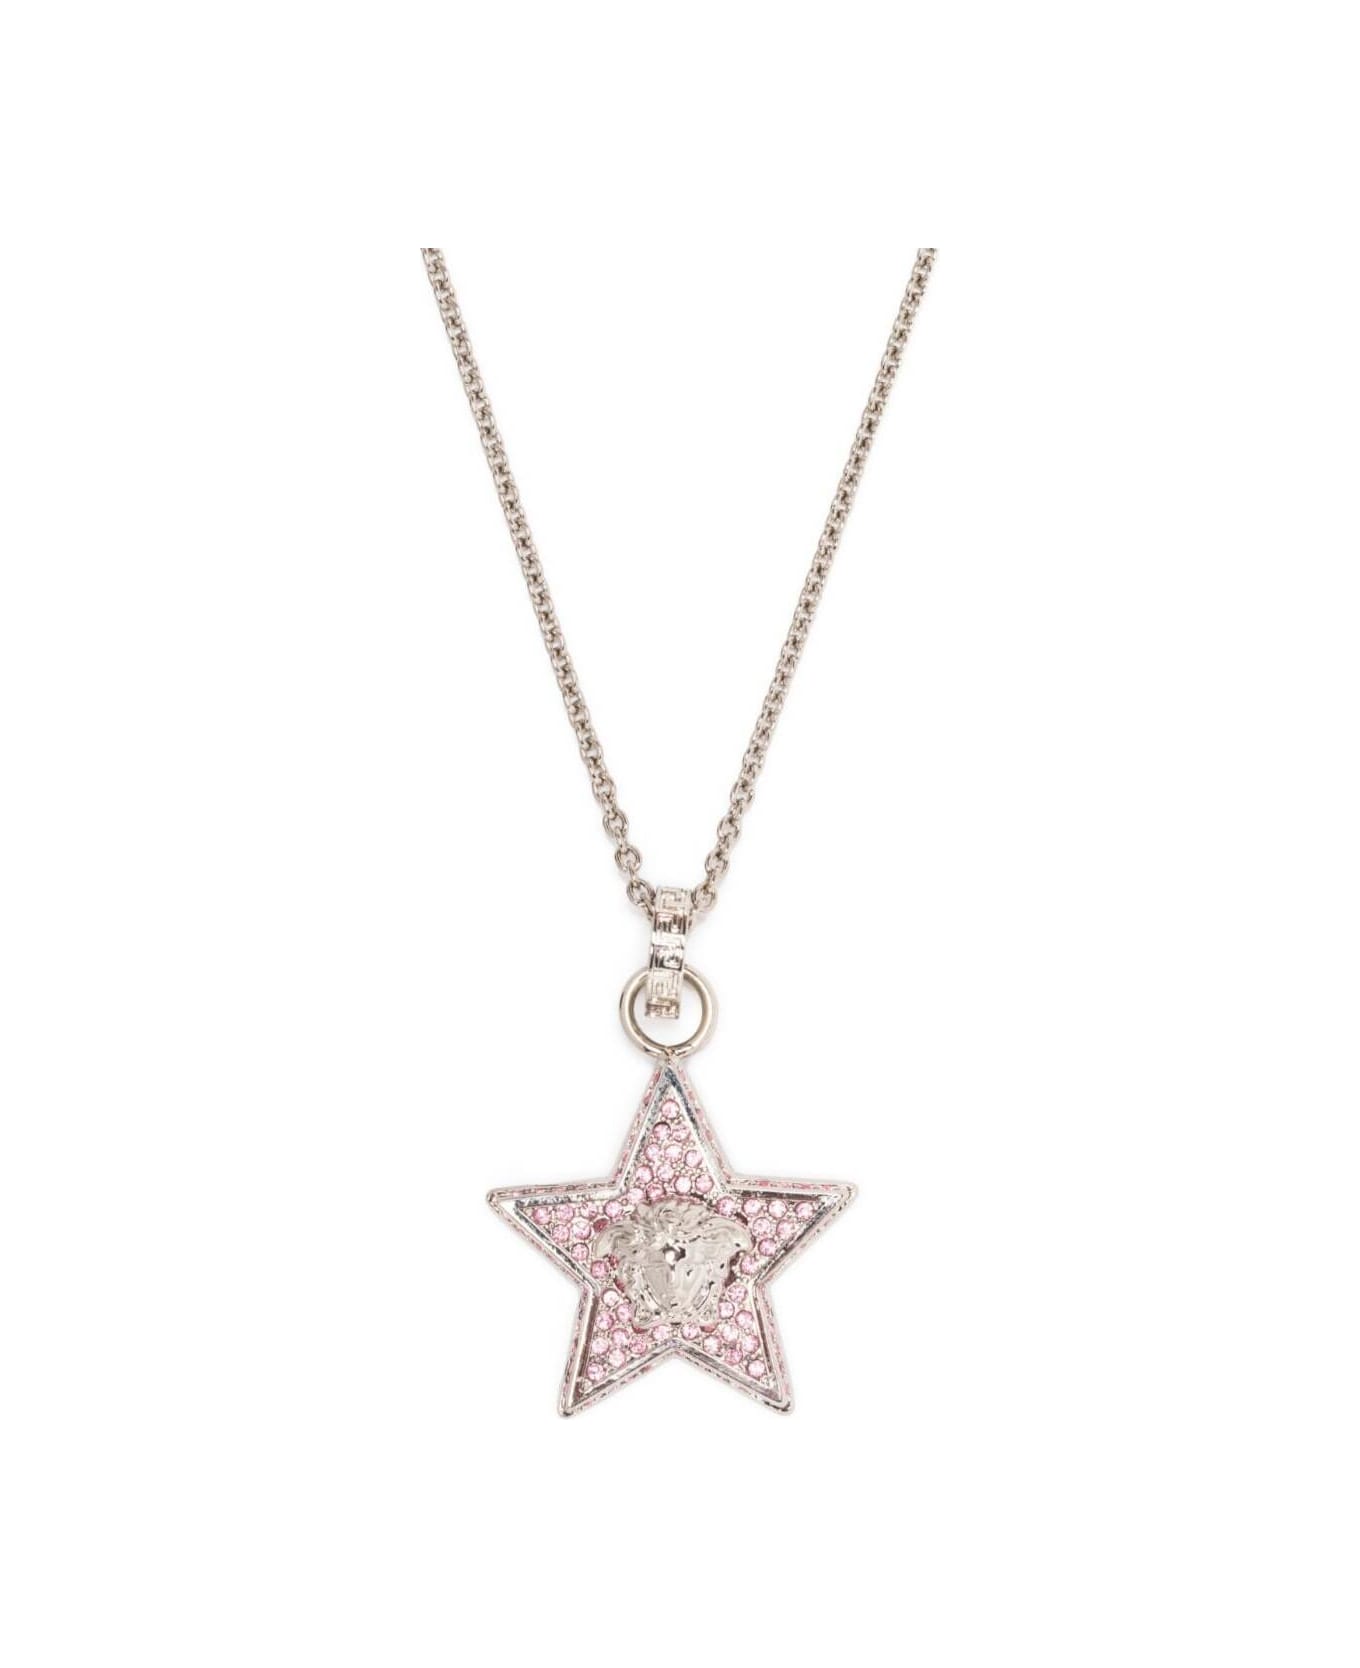 Versace Silver Tone Star Pendant Chain Necklace In Brass Woman - Metallic ネックレス